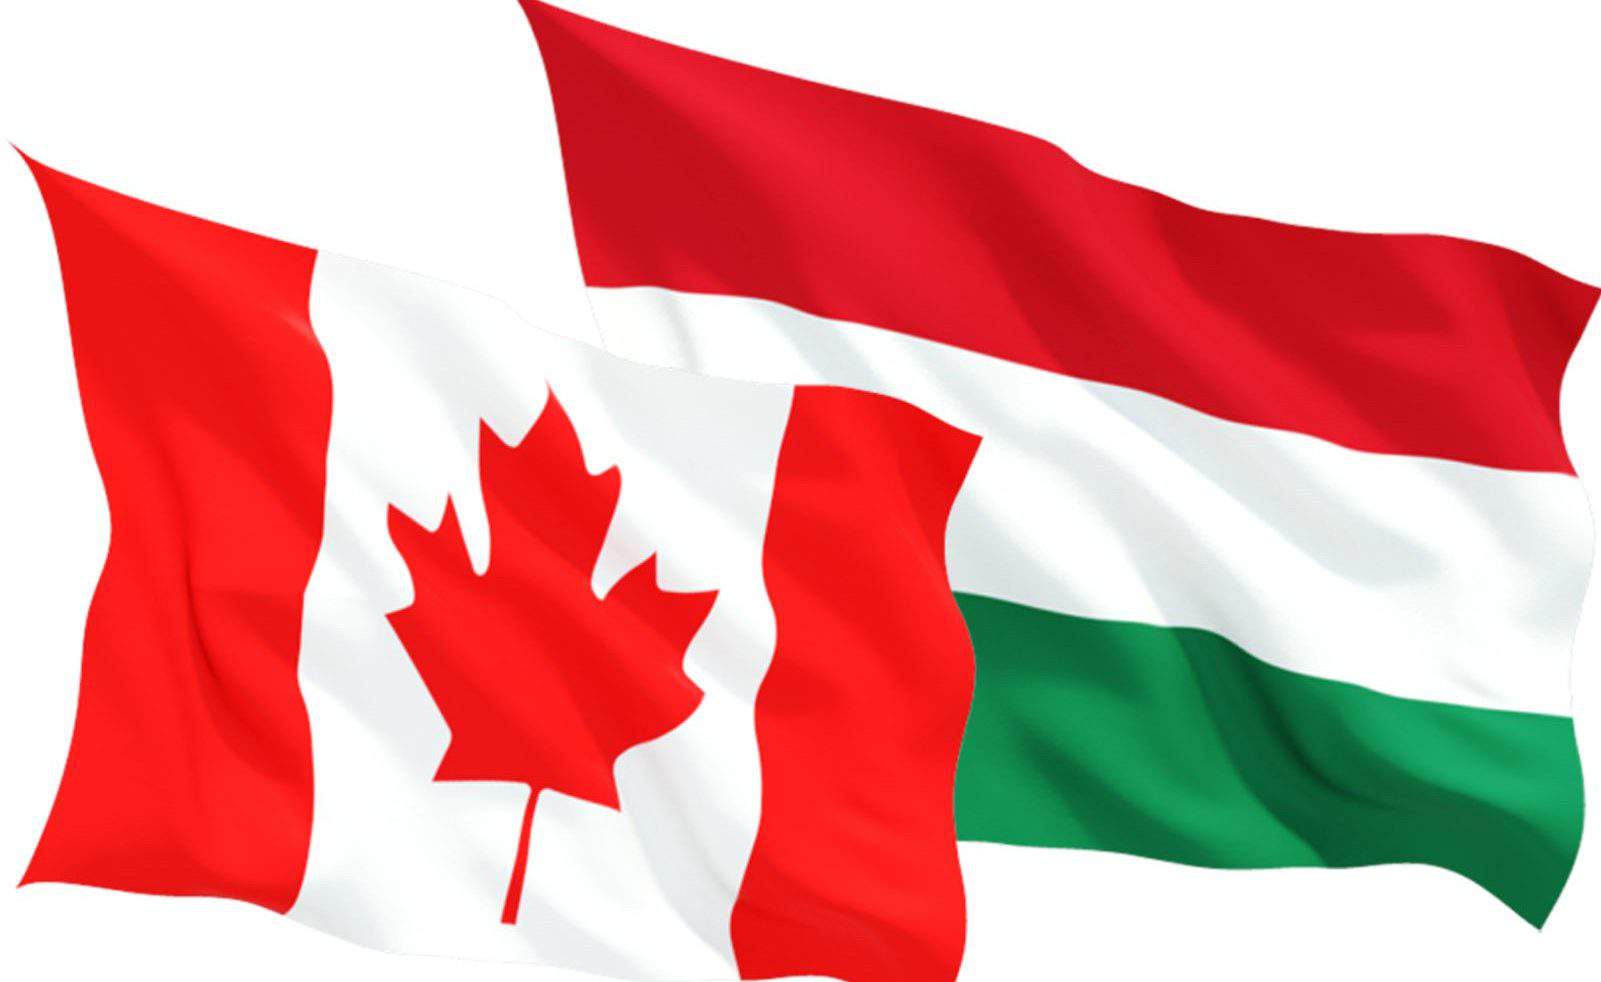 Canadian lawmakers establish Canada-Hungary friendship group